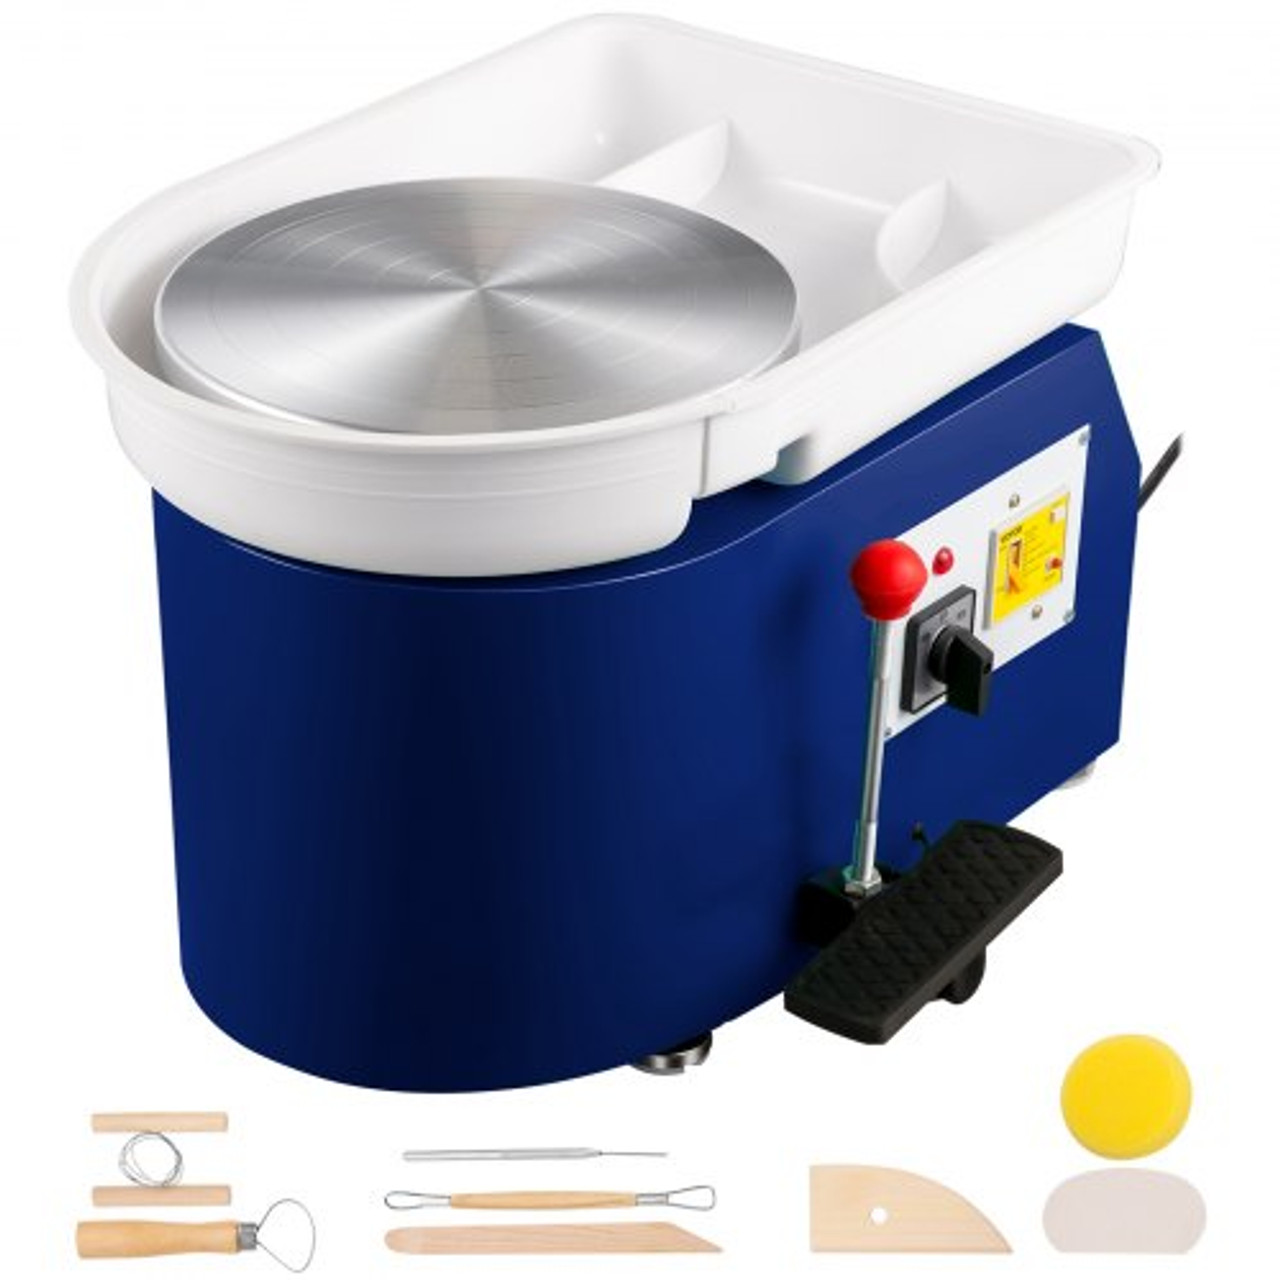 Pottery Wheel 28cm Pottery Forming Machine 350W Electric Pottery Wheel with Adjustable Feet Lever Pedal DIY Clay Tool with Tray for Ceramic Work Clay Art DIY Clay Blue, 10 Piece